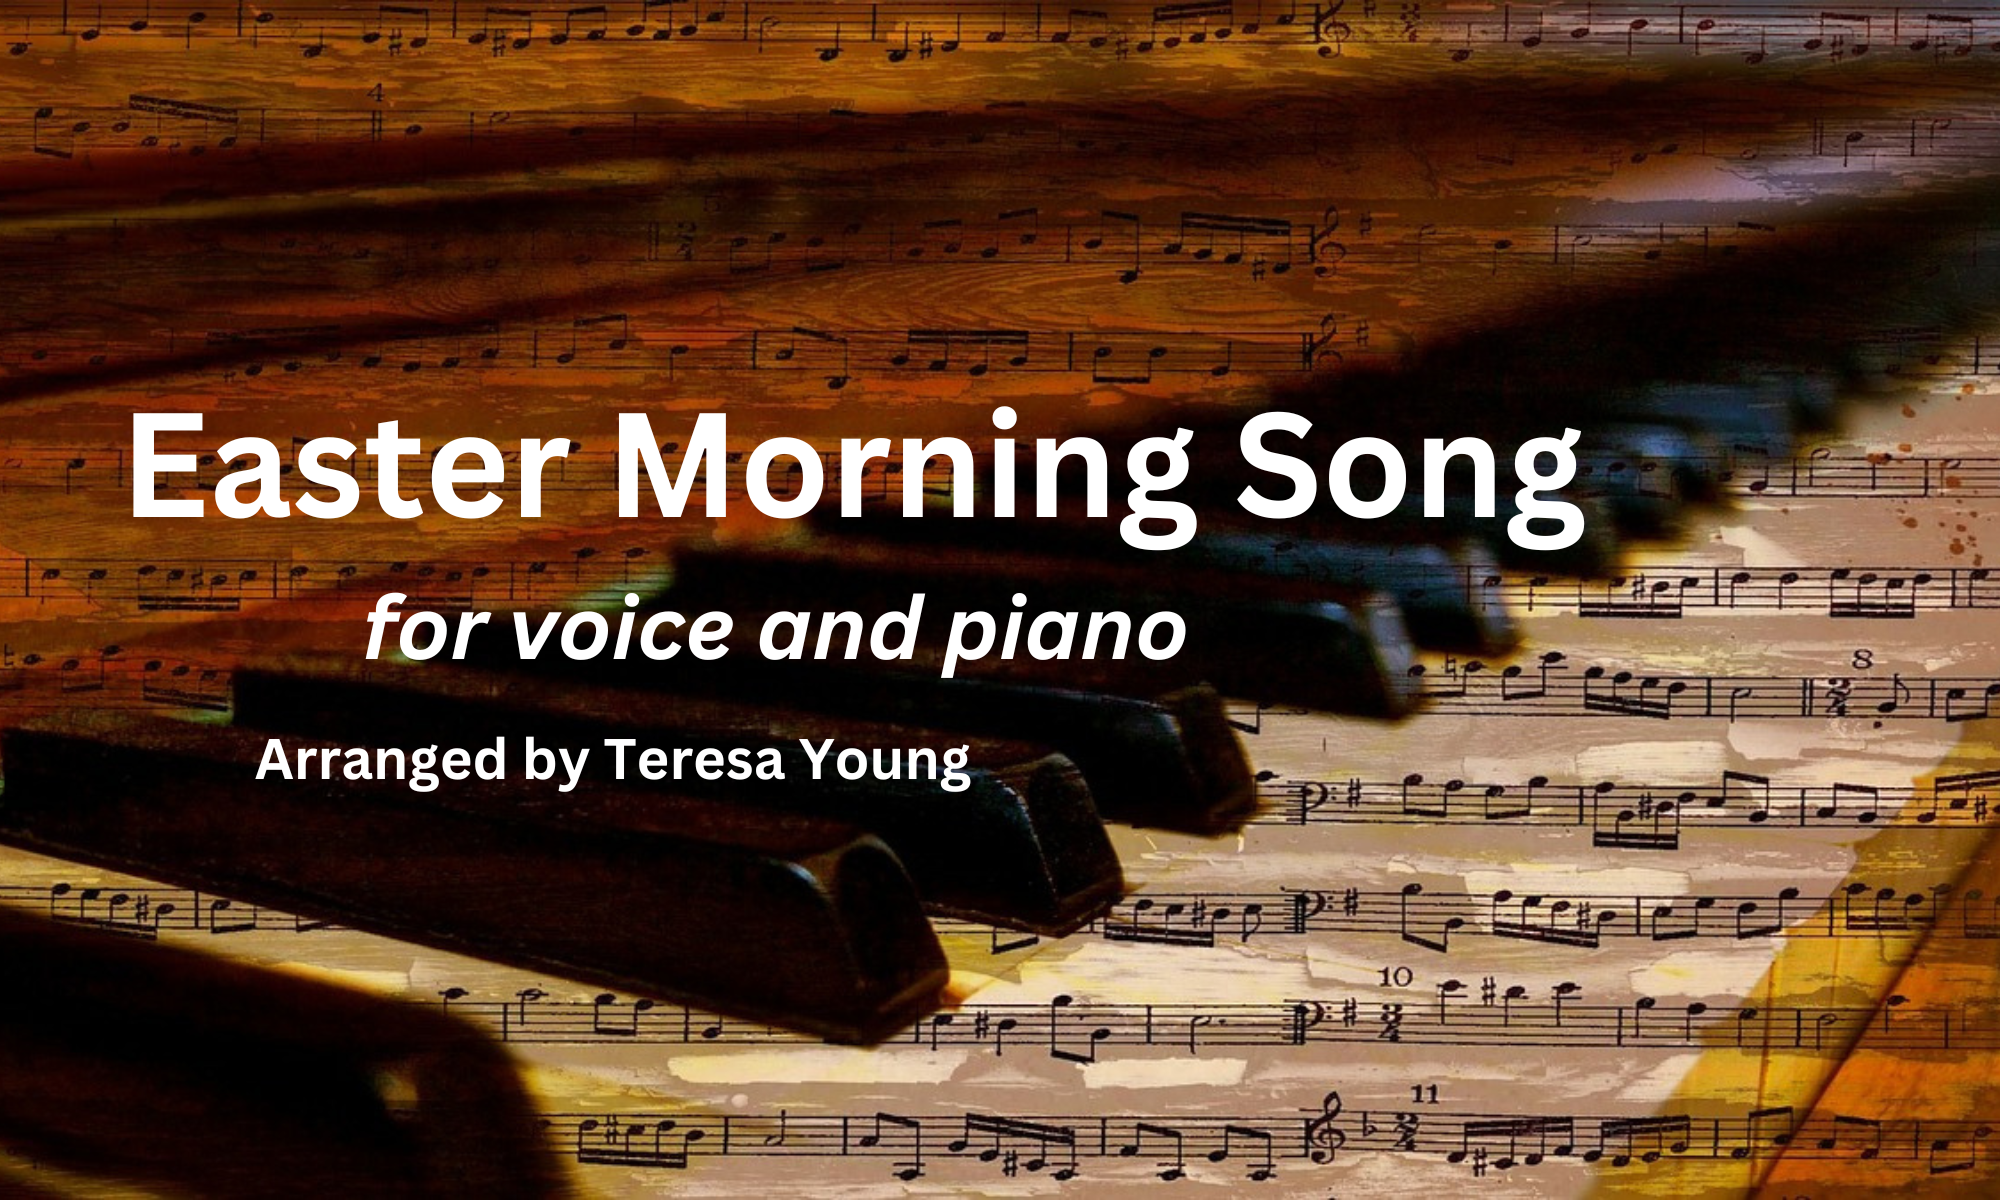 Easter Morning Song, for voice and piano by Teresa Young